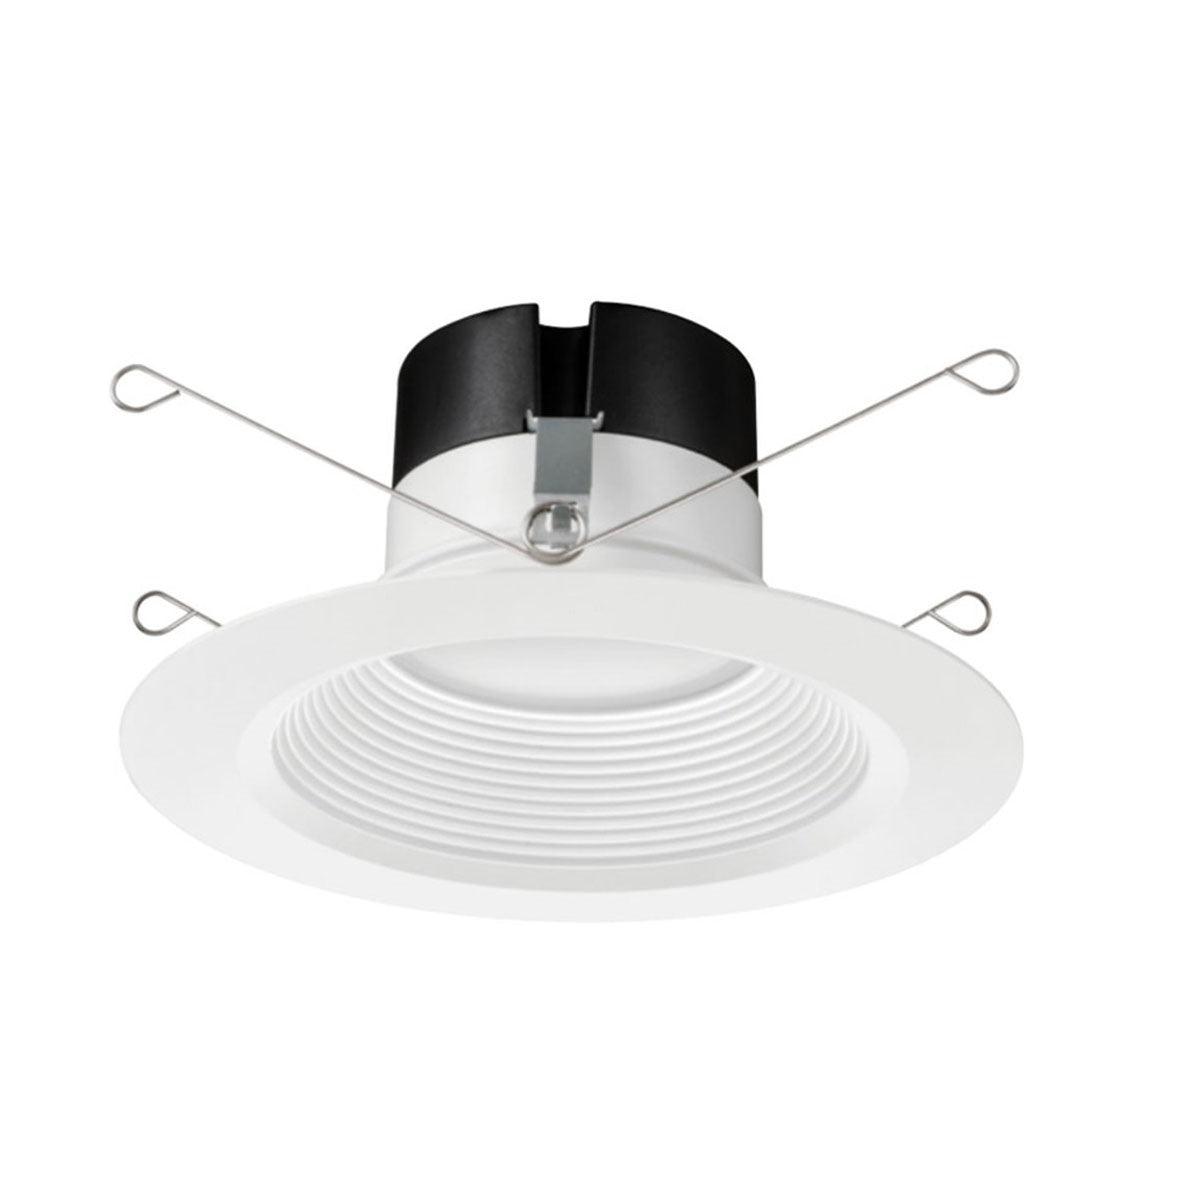 6 Inch Recessed LED Can Light, Round, 13 Watt, 1200 Lumens, Selectable CCT, 2700K to 5000K, Baffle Trim